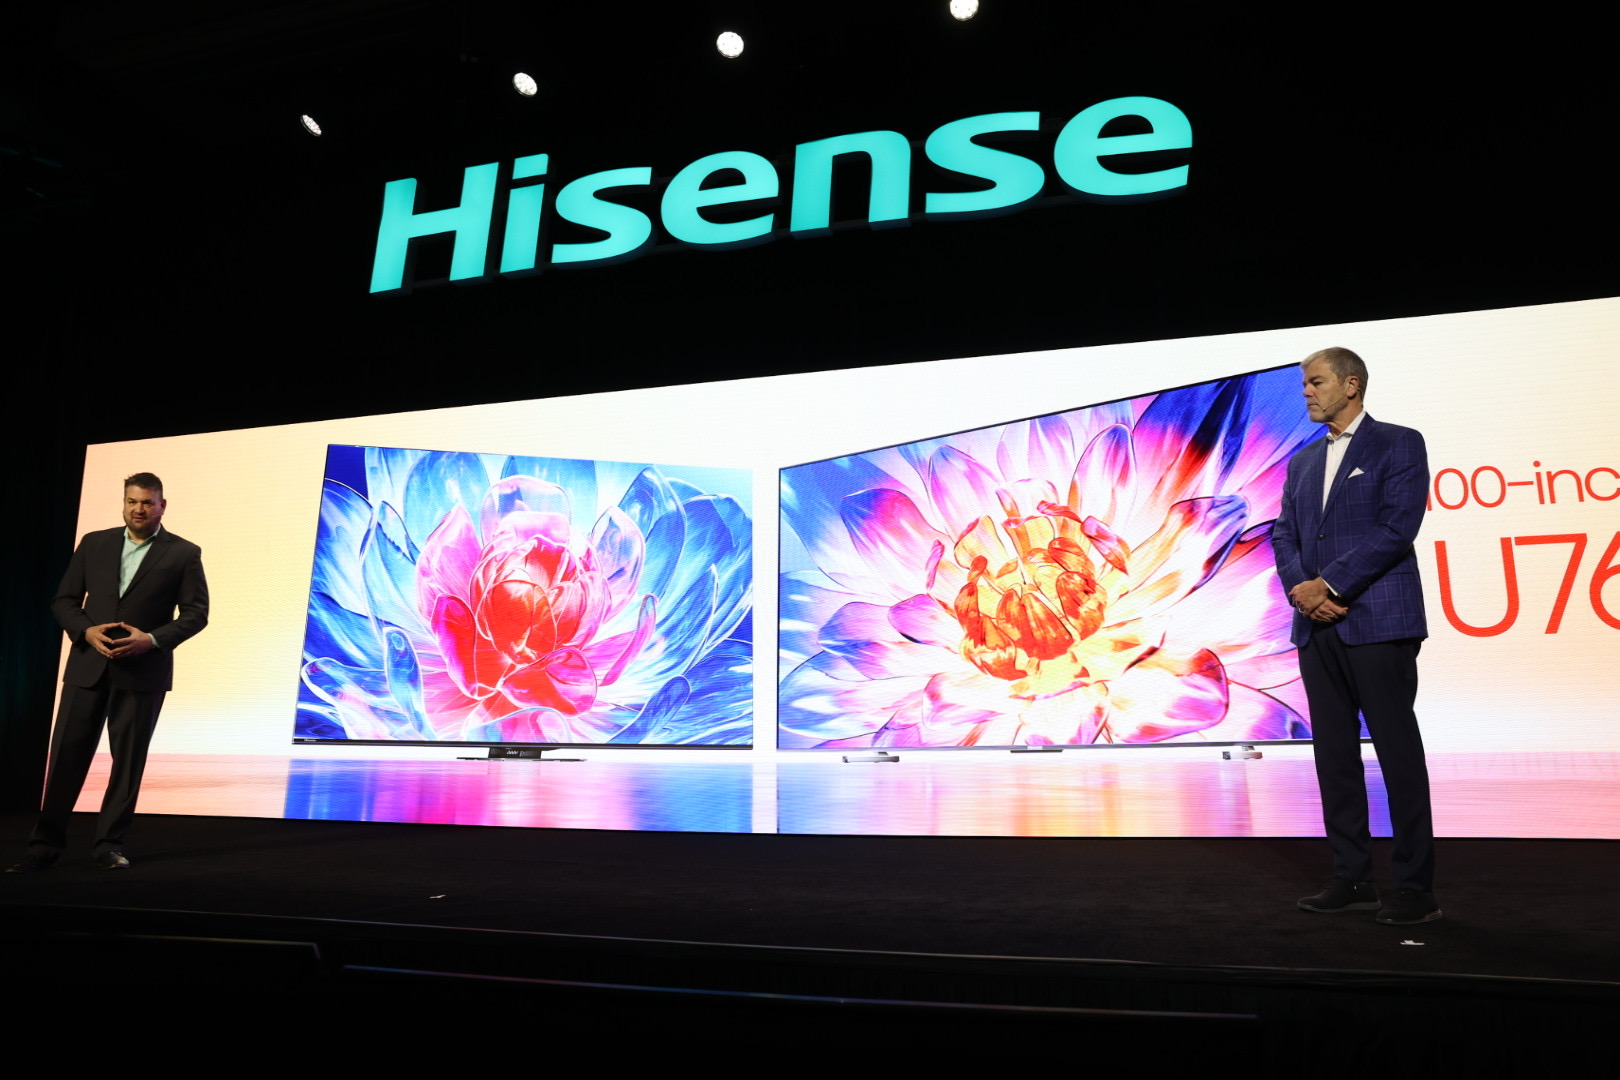 Hisense shows off massively bright 98- and 100-inch TVs at CES 